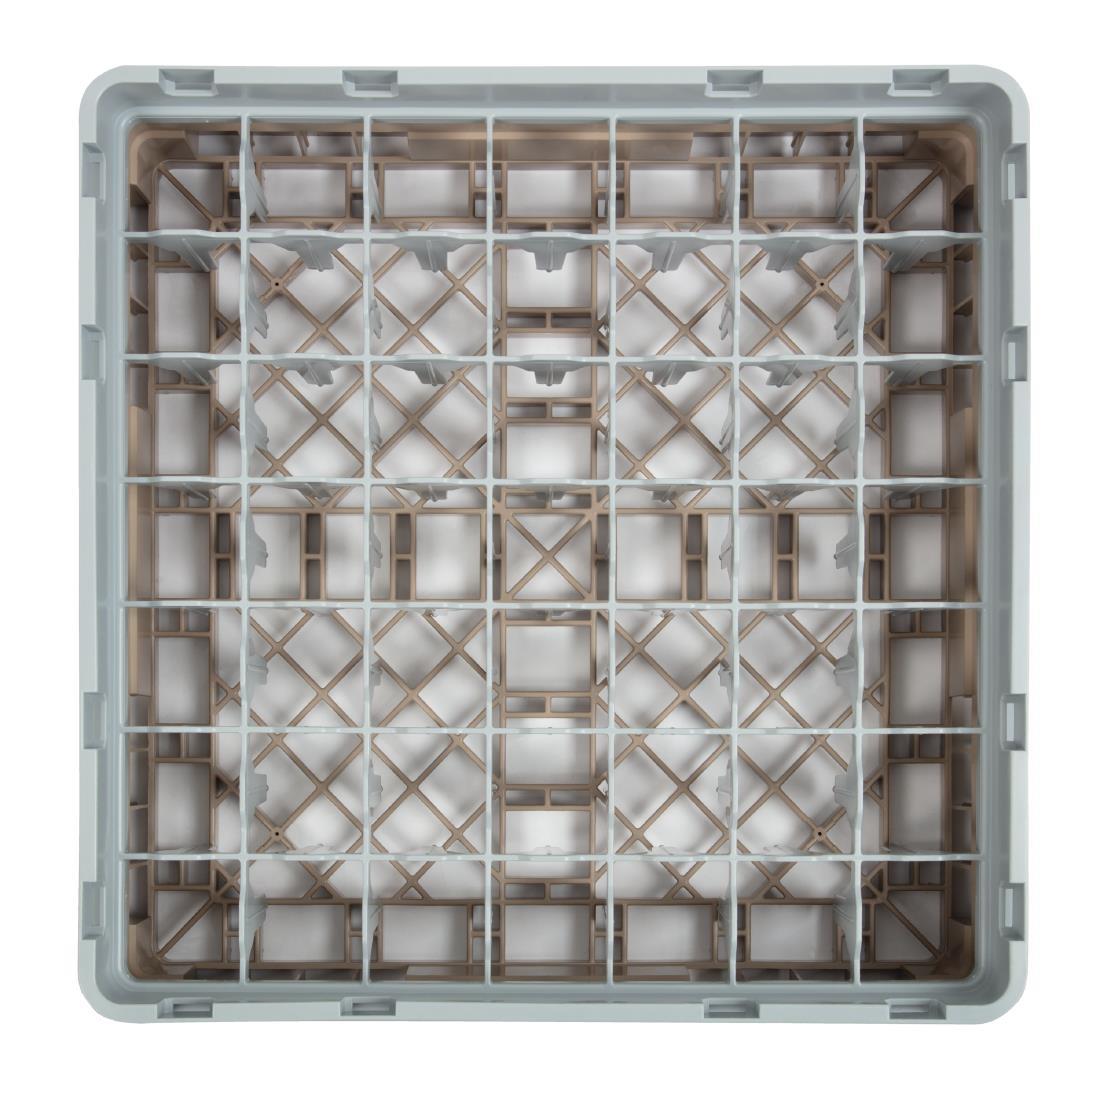 Cambro Camrack Beige 49 Compartments Max Glass Height 92mm - DW561  - 4